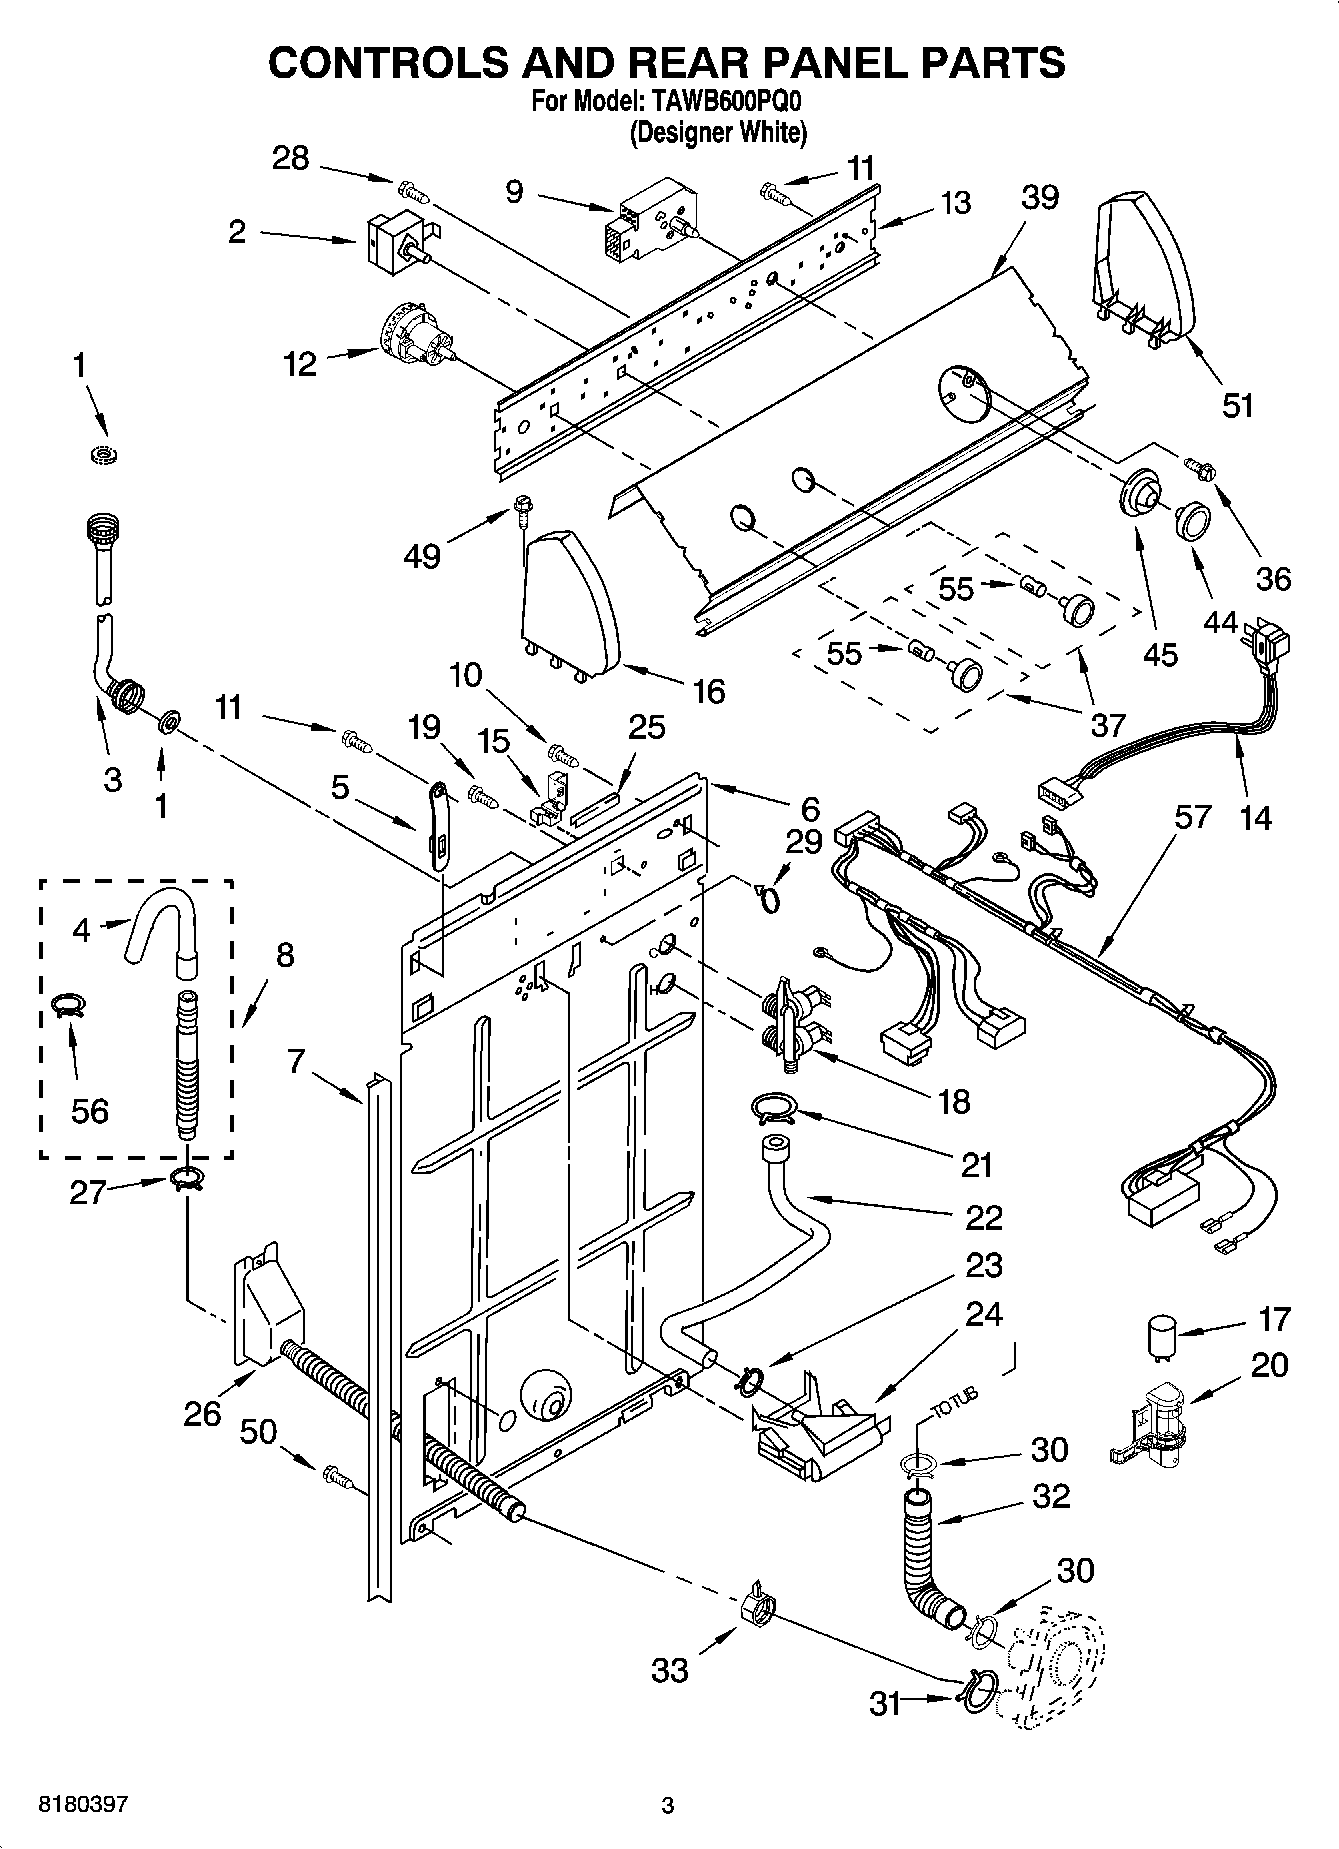 02 - CONTROL AND REAR PANEL PARTS